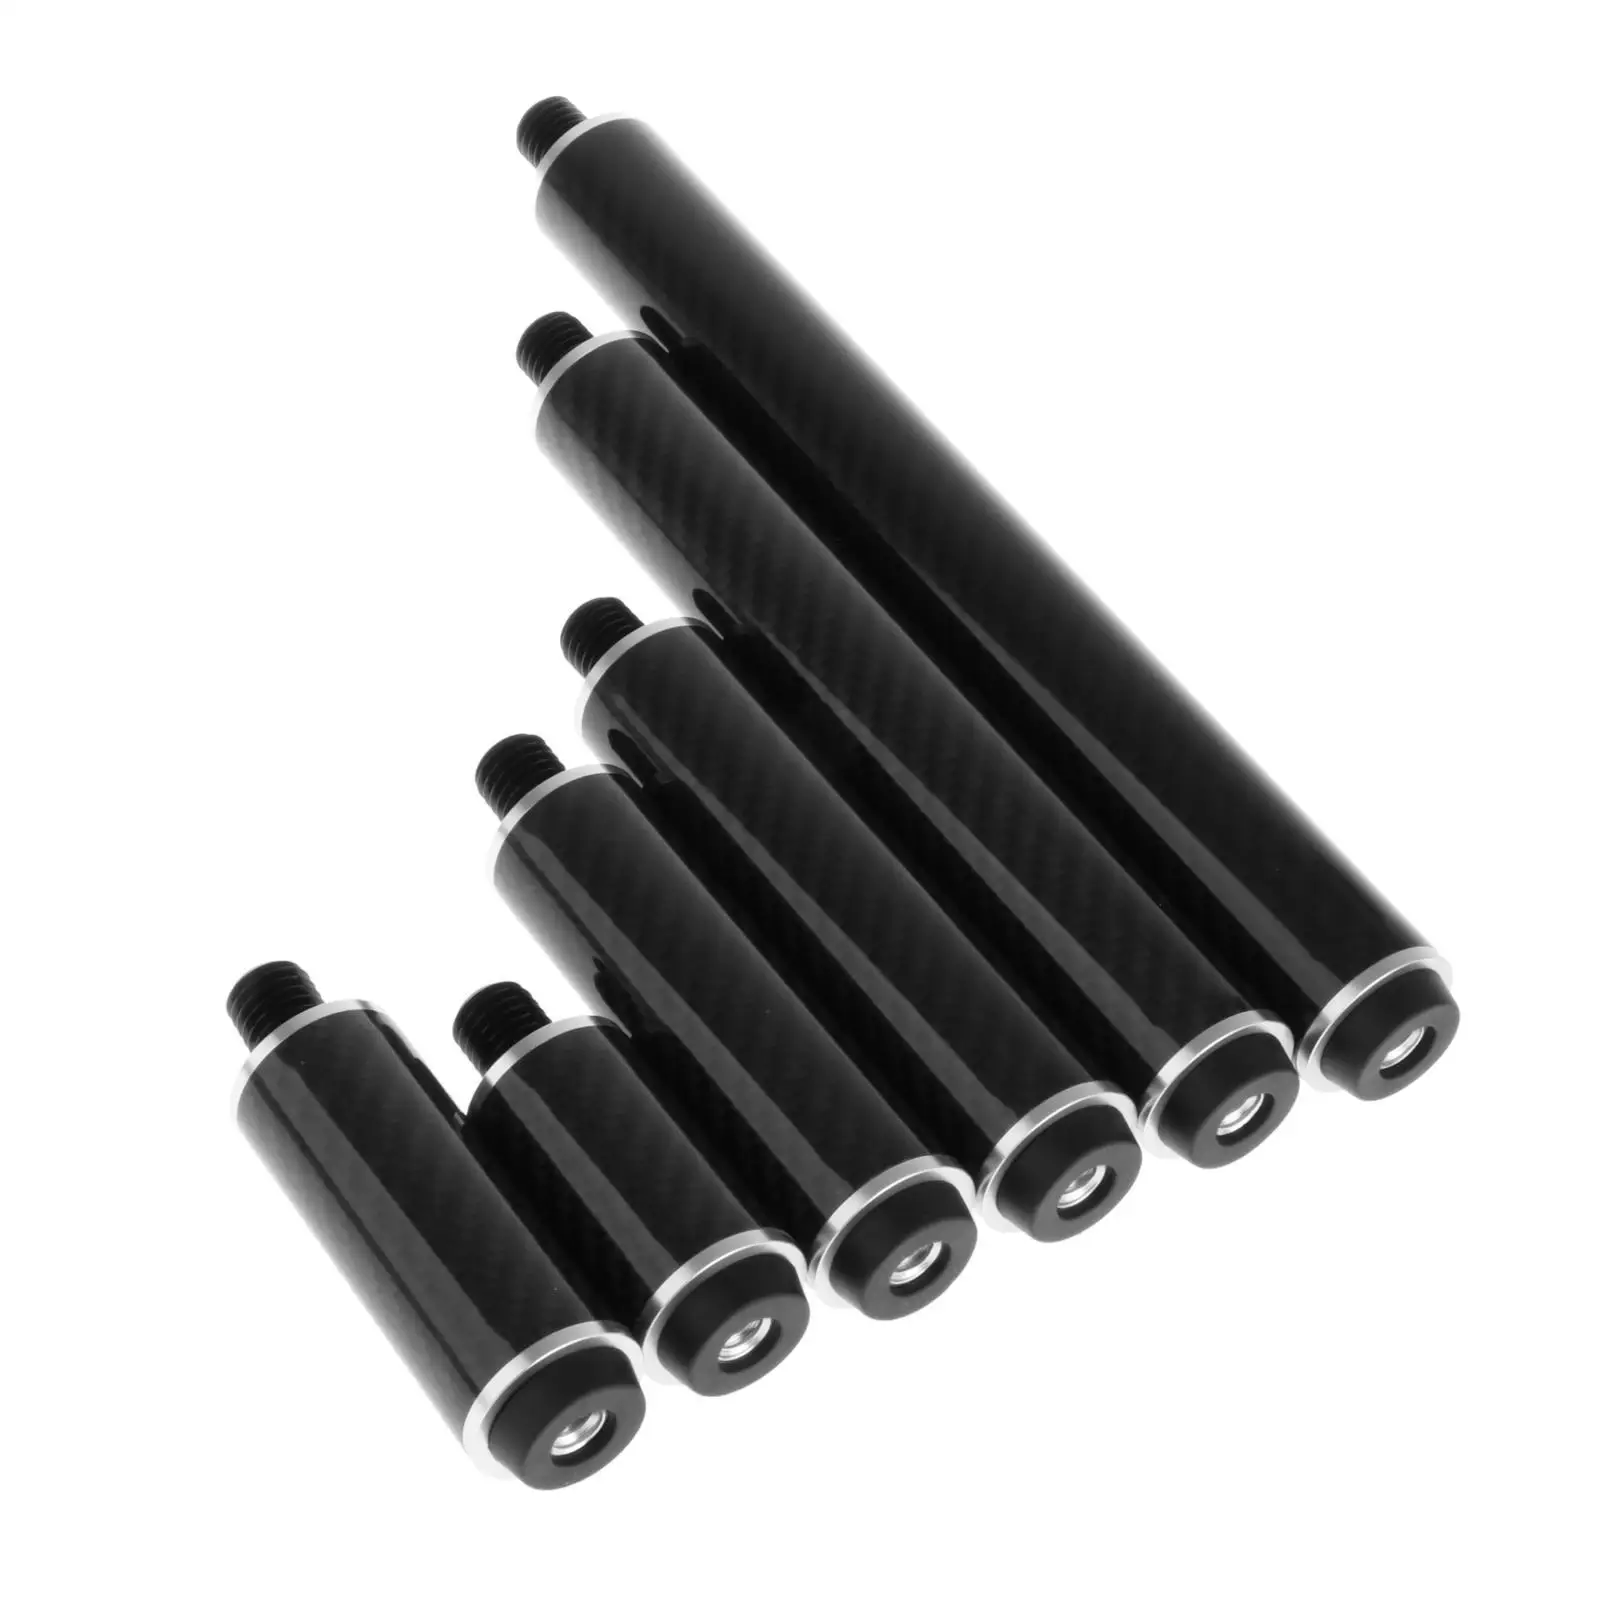 Billiards Pool Cue Extension, Cue End Extended Carbon Fiber Billiard Connect Shaft Snooker Cue for Training Player Beginners